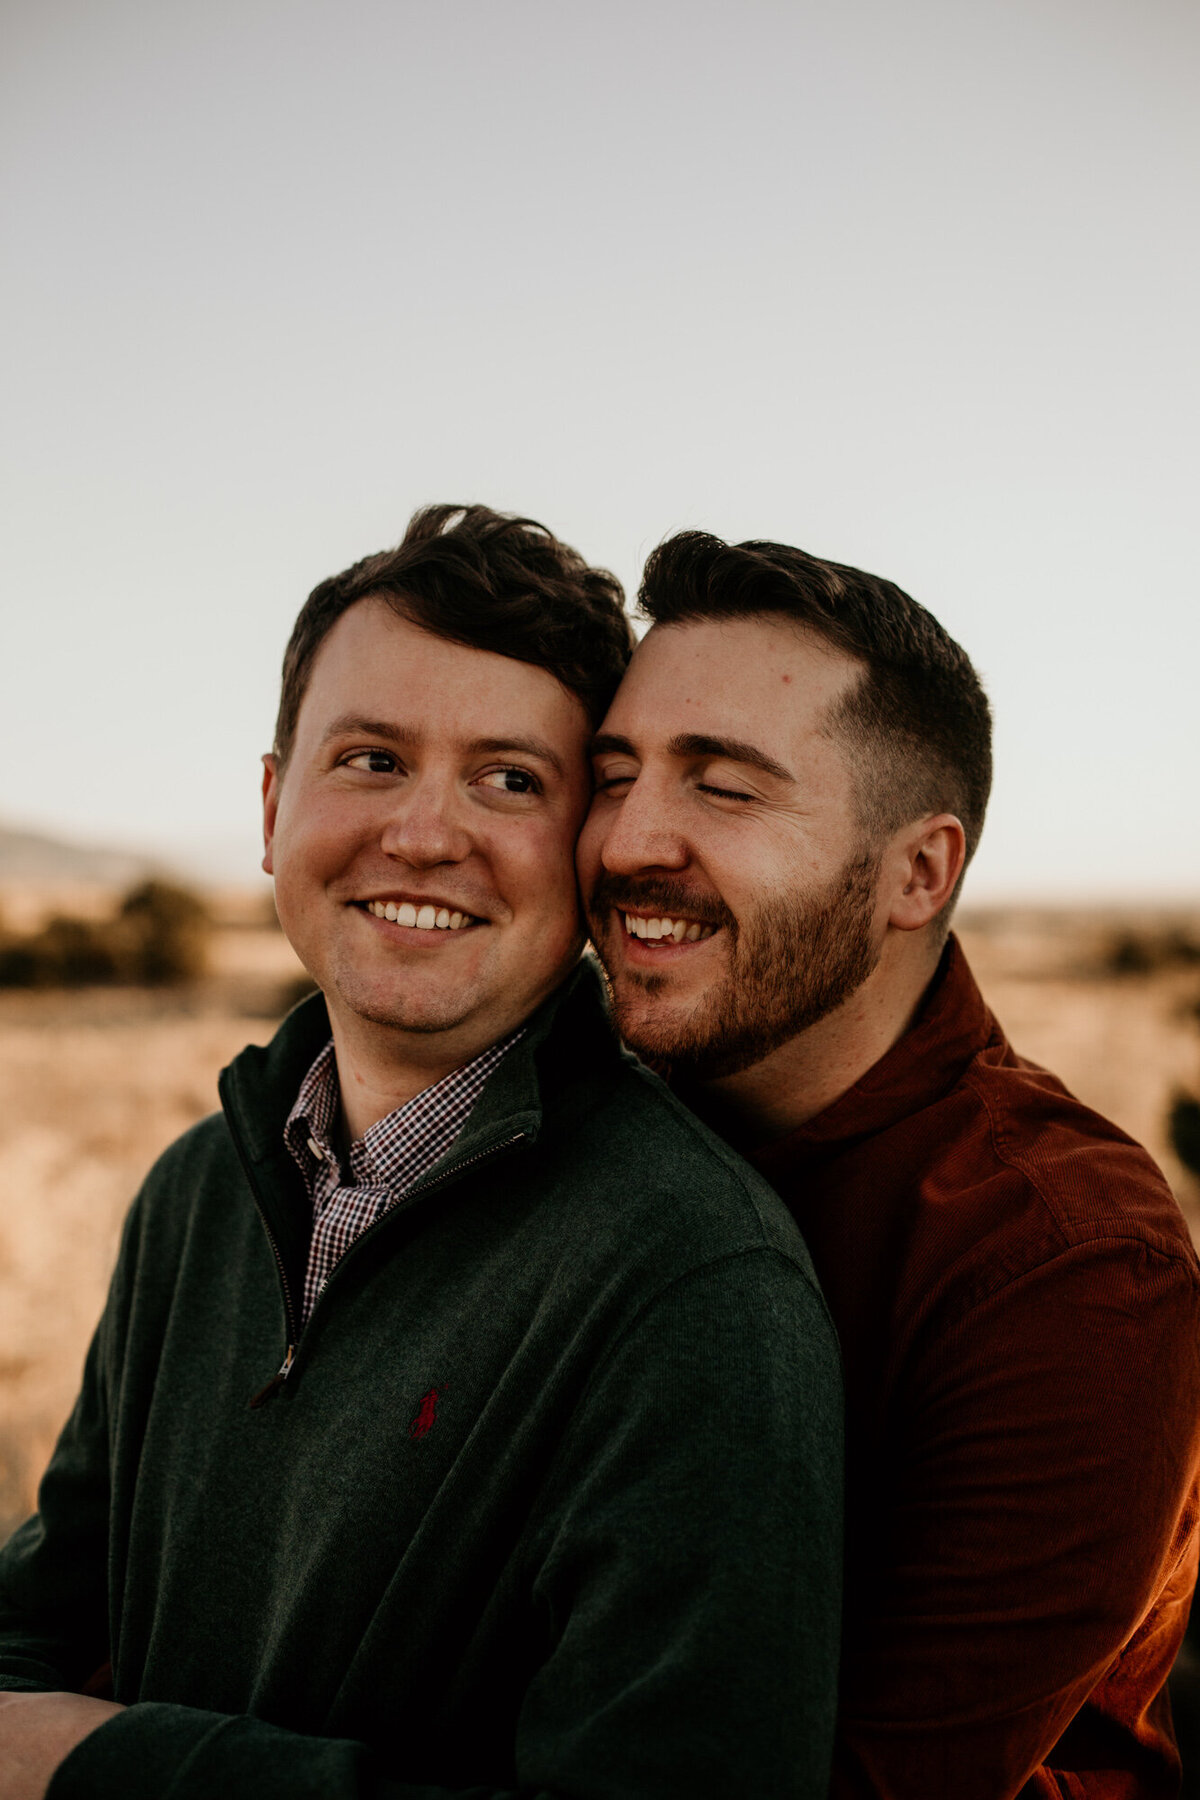 gay couple with their heads touching and laughing